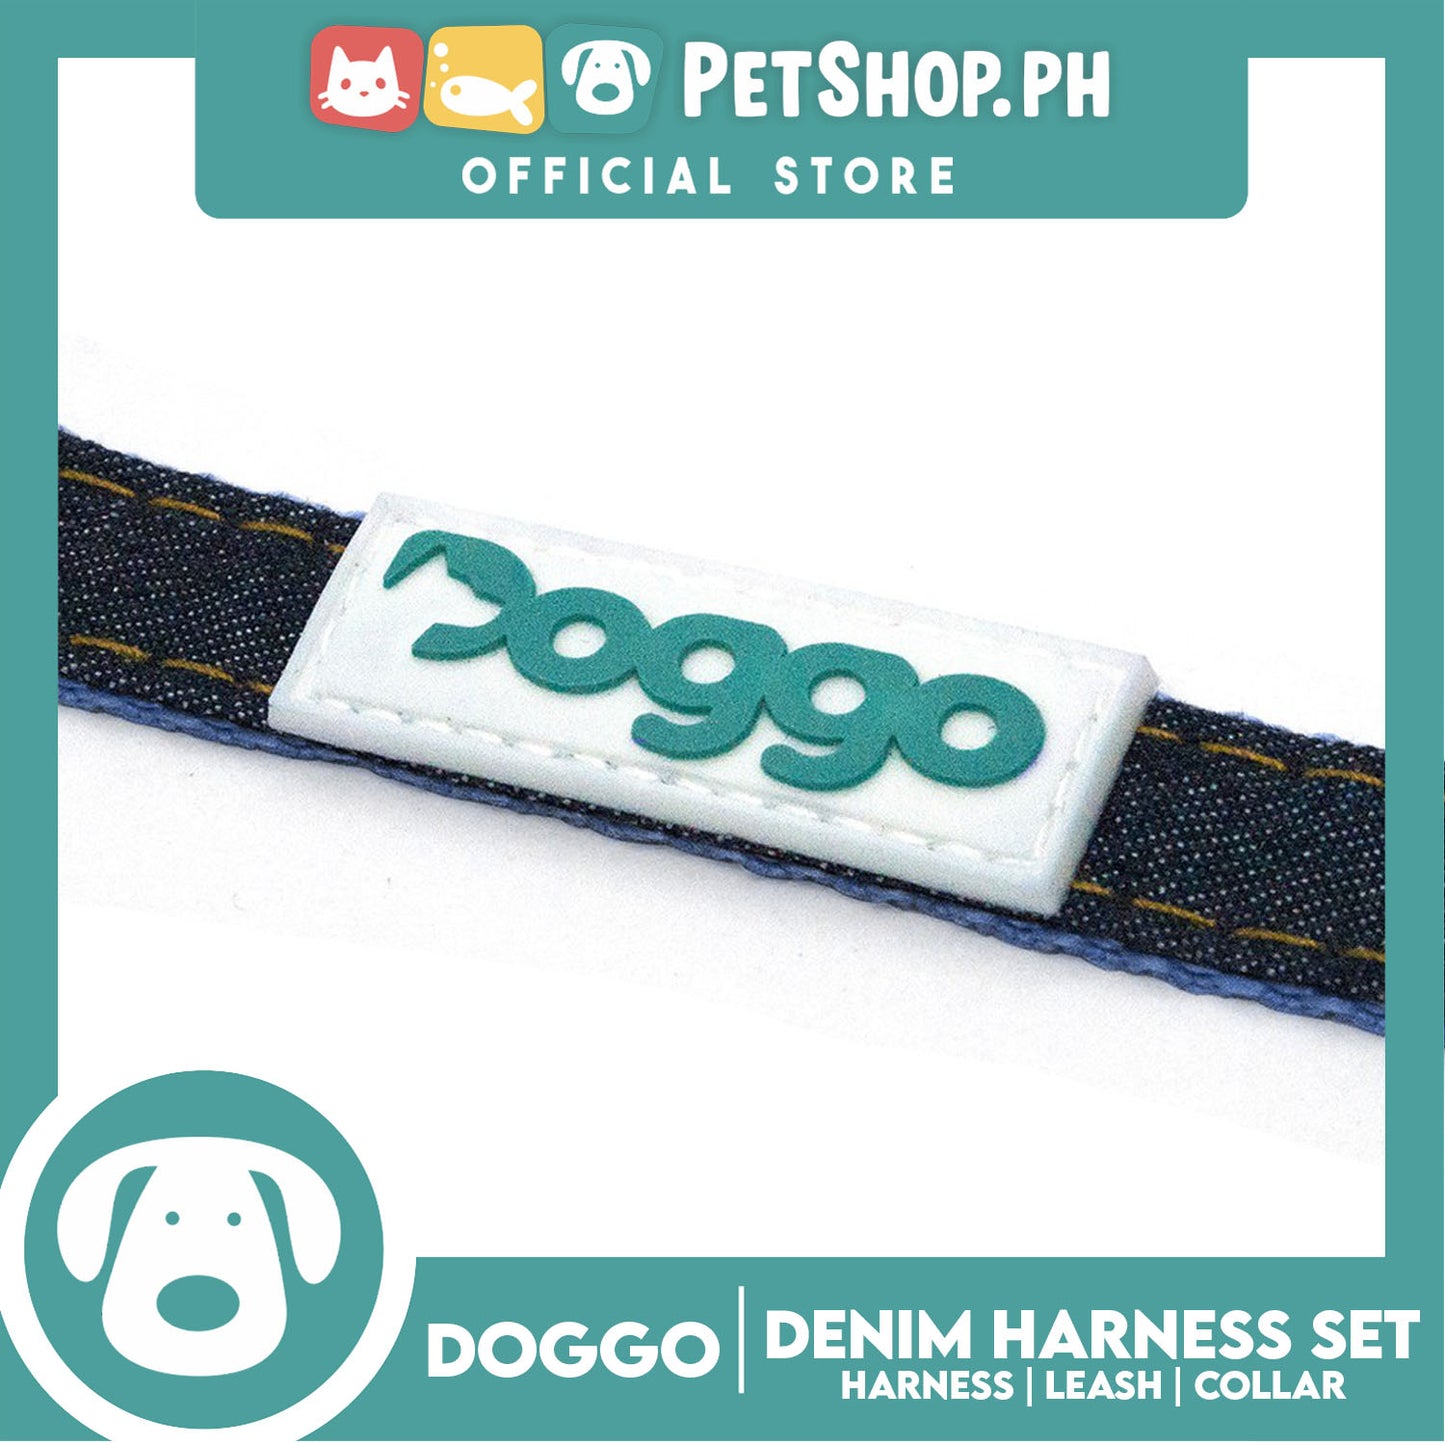 Doggo Strong Harness Set Denim Design Extra Small (Blue) Harness, Leash and Collar for Your Dog